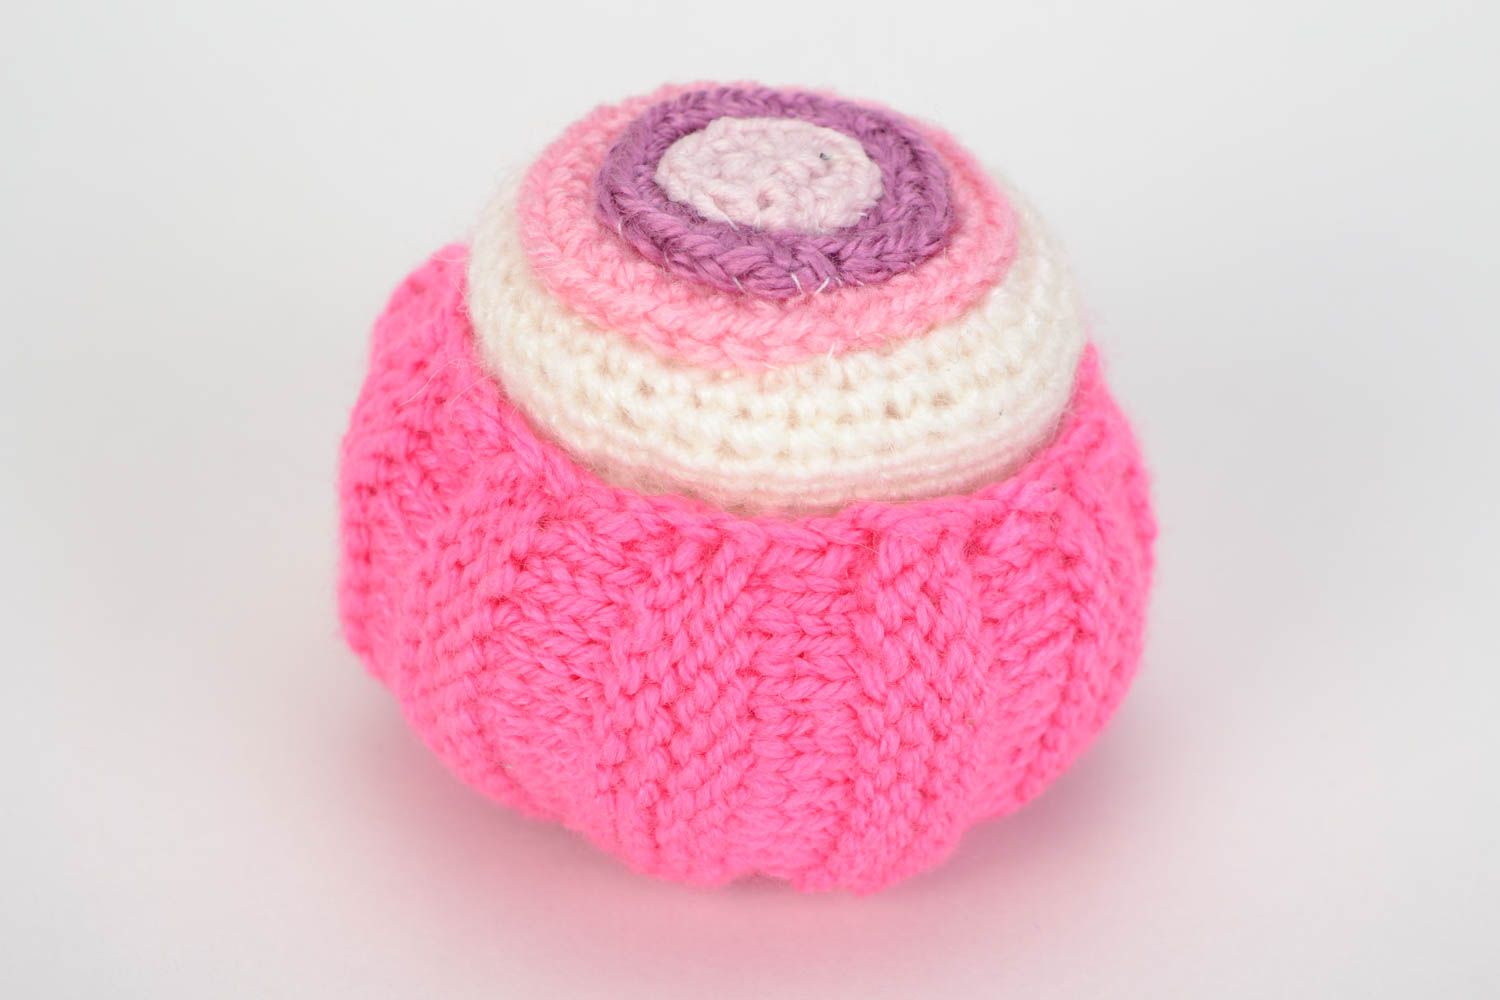 Small pink soft handmade crochet cake for children and home decor photo 3